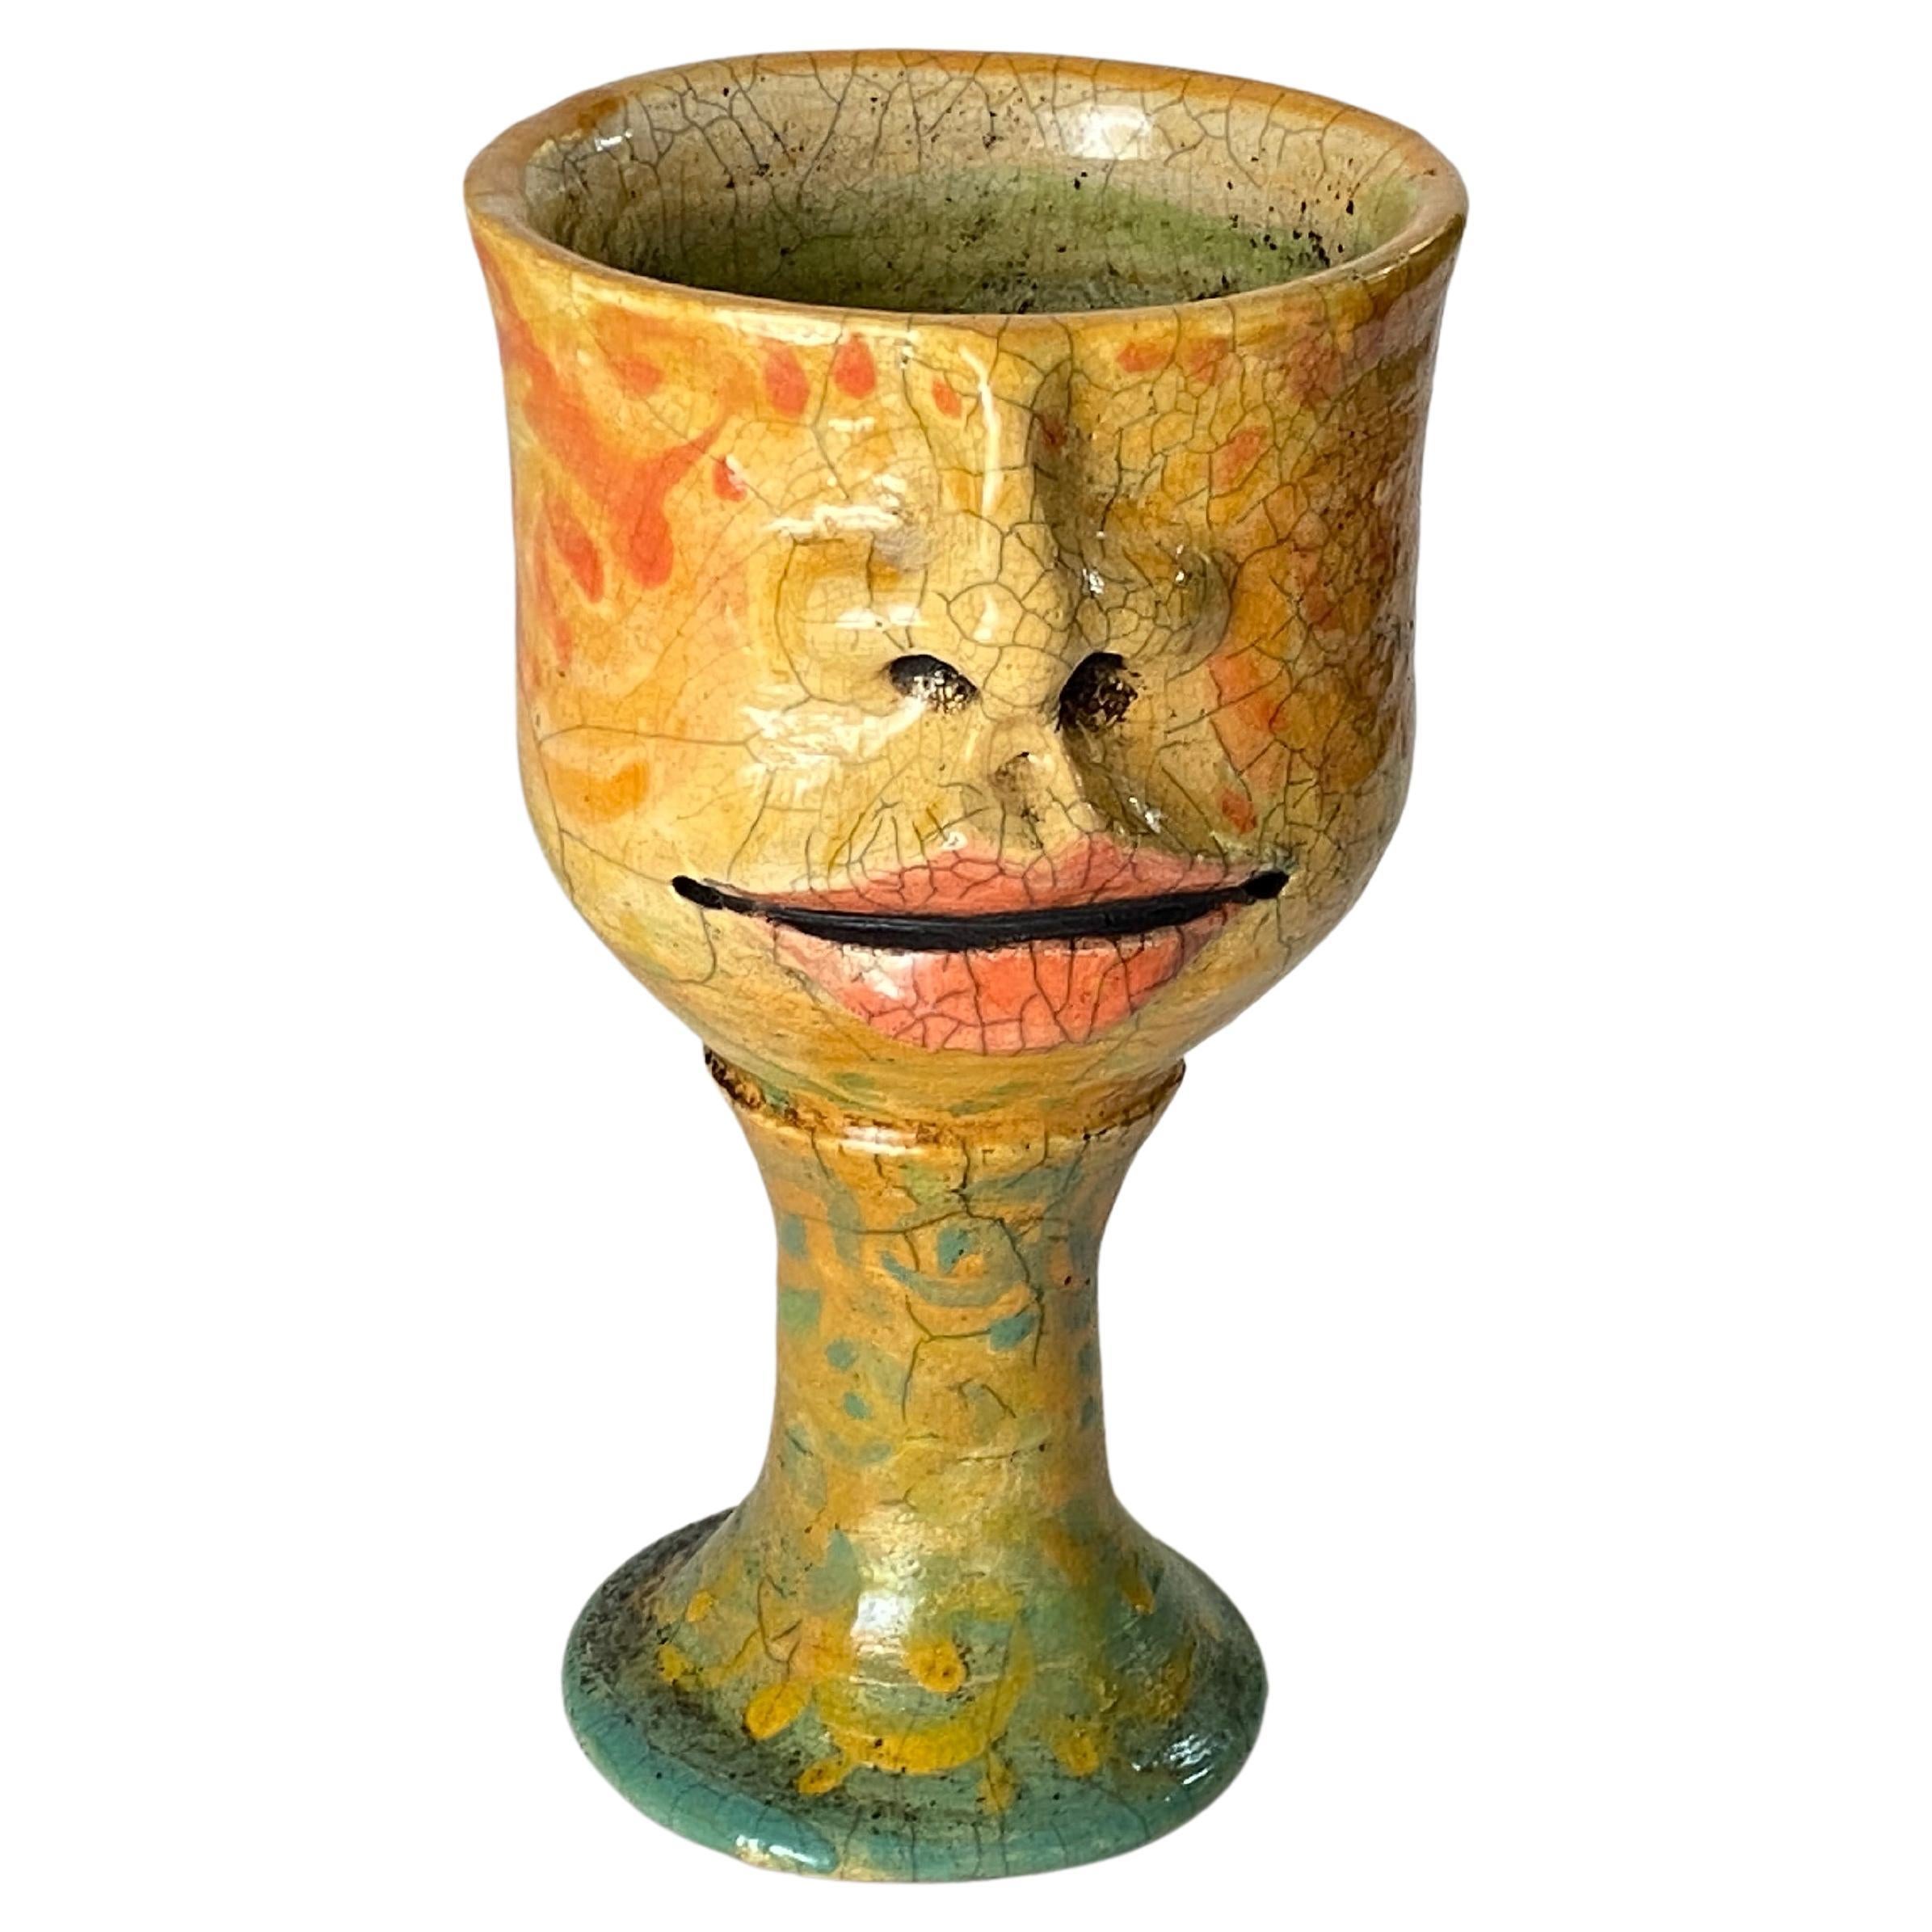 French Yellow Chalice in majolica
cracked ceramic. Signed with a name and Vallauris, France.